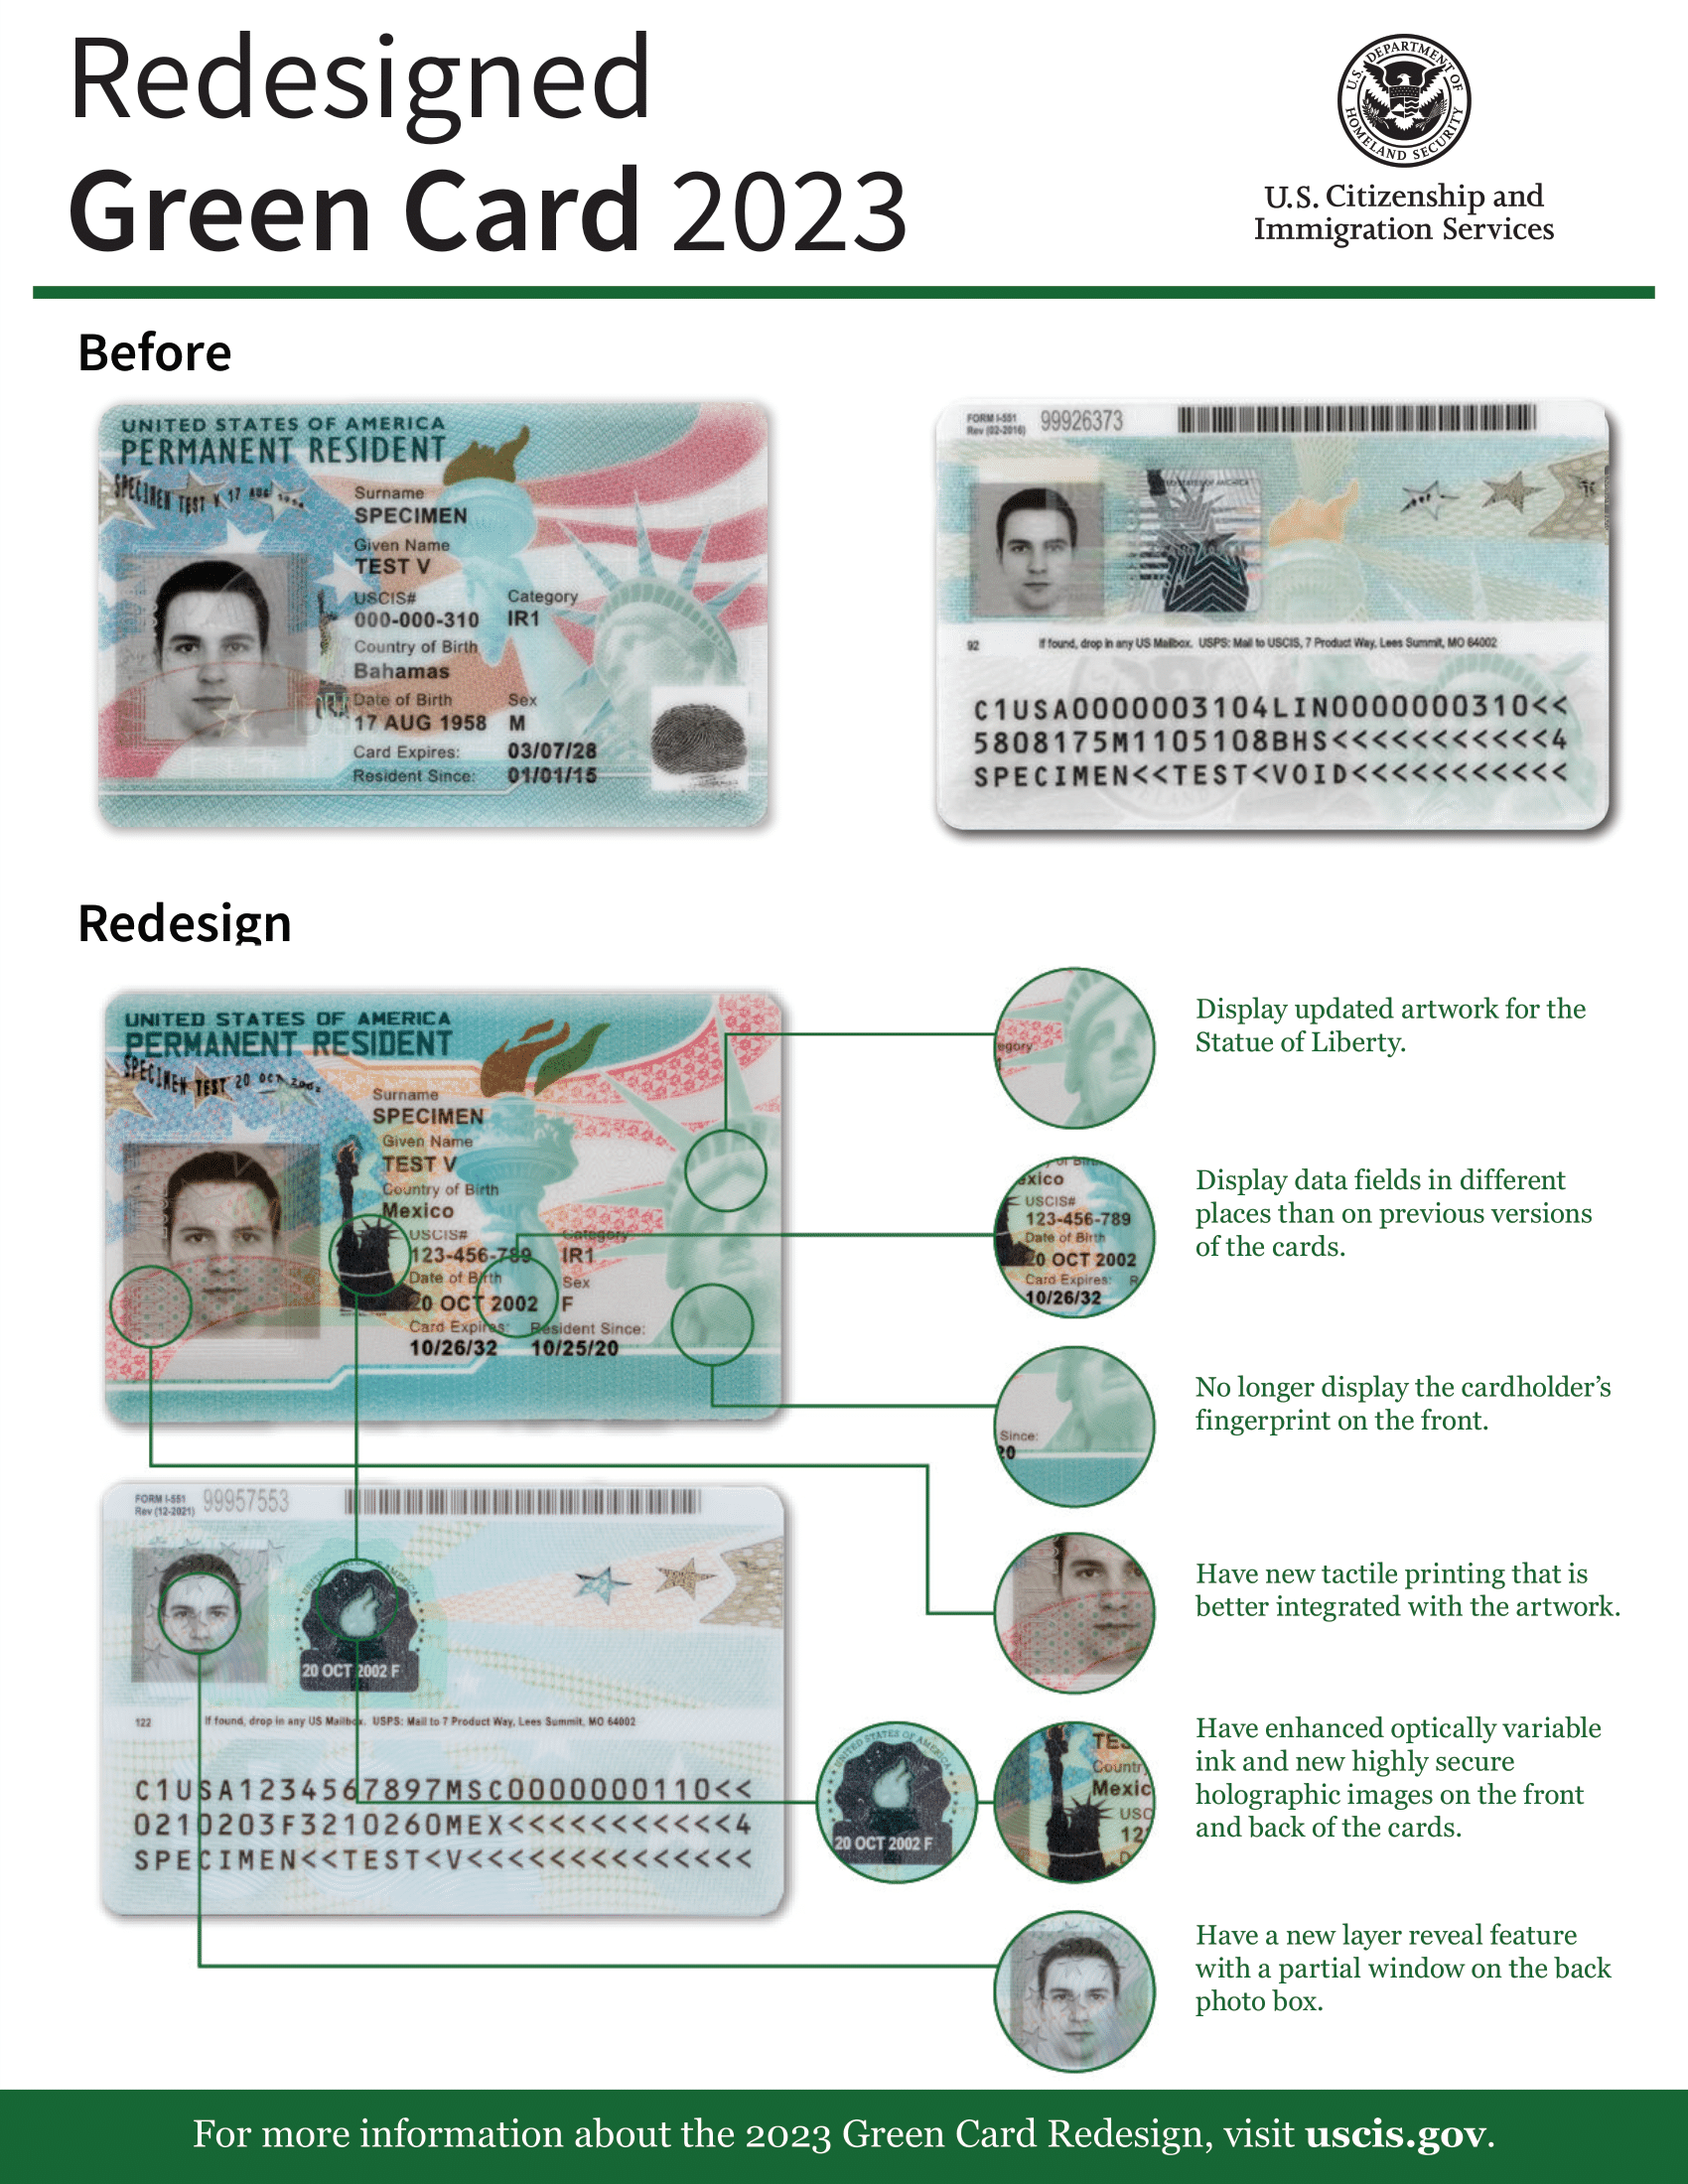 A USCIS showing previous Green Card design and the re-design.